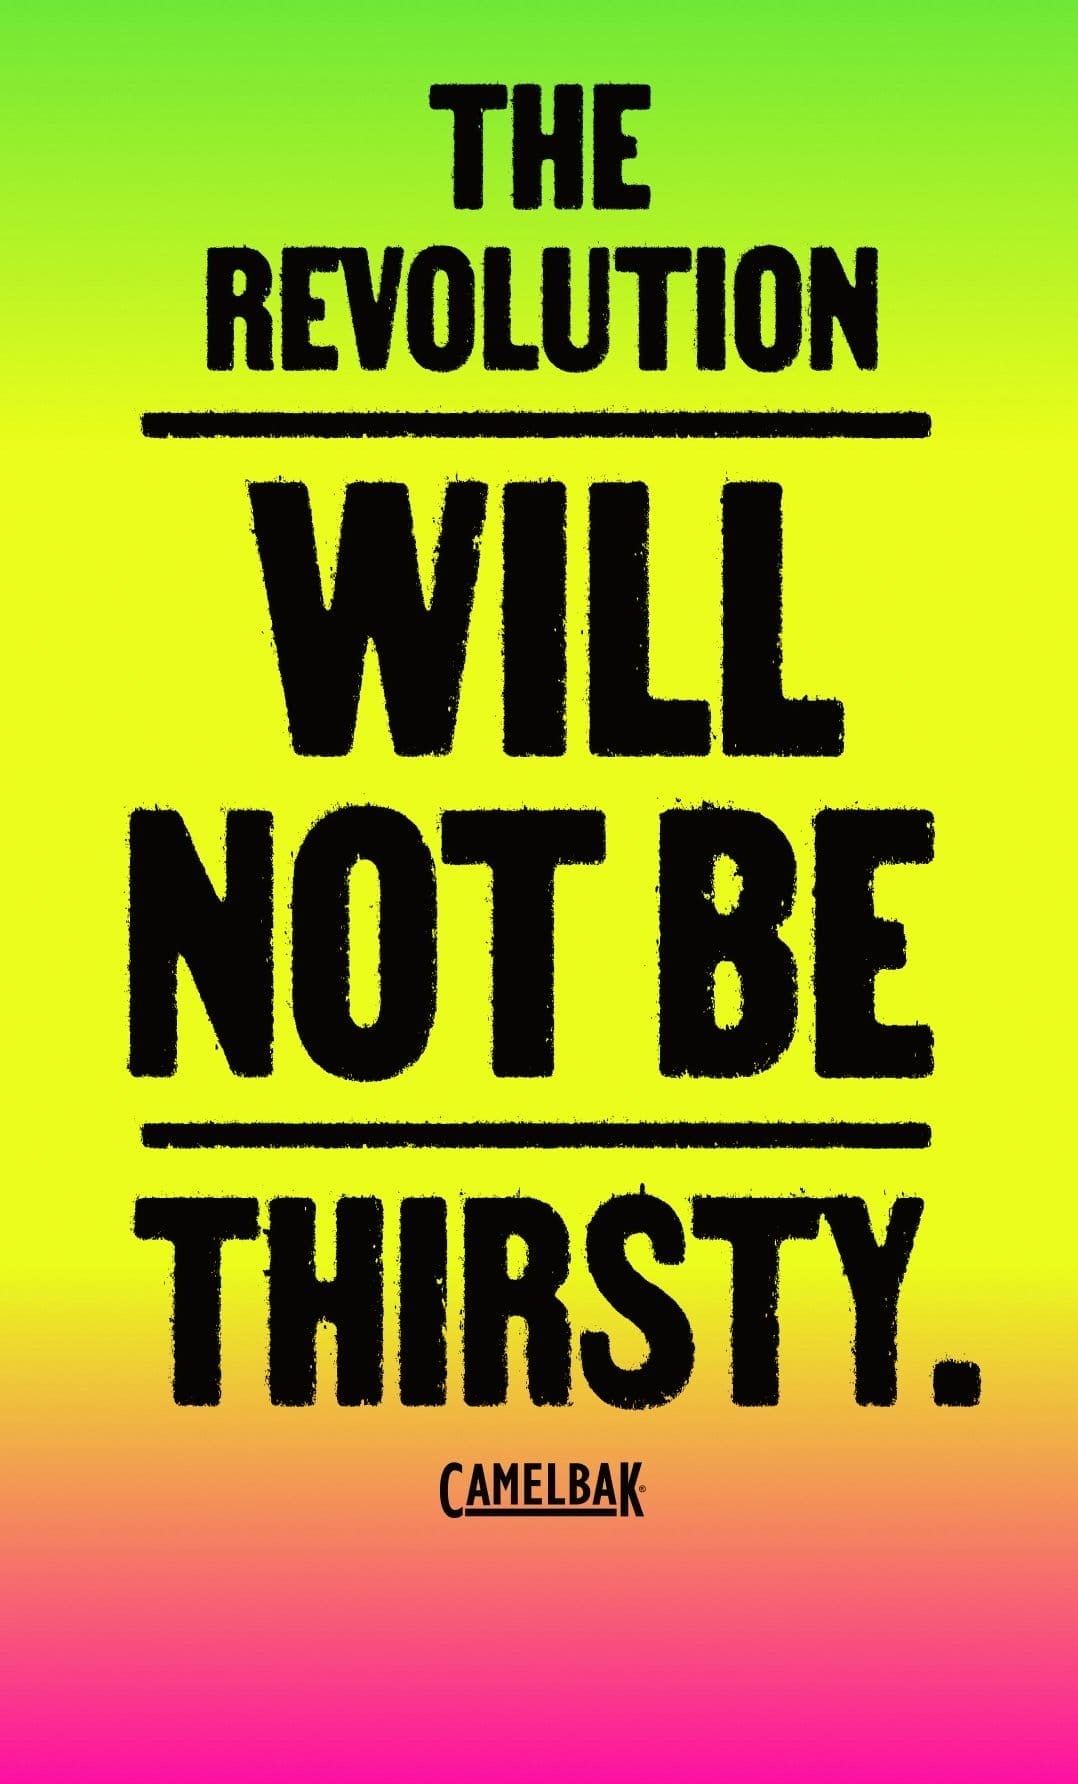 The Revolution Will Not Be Thirsty.